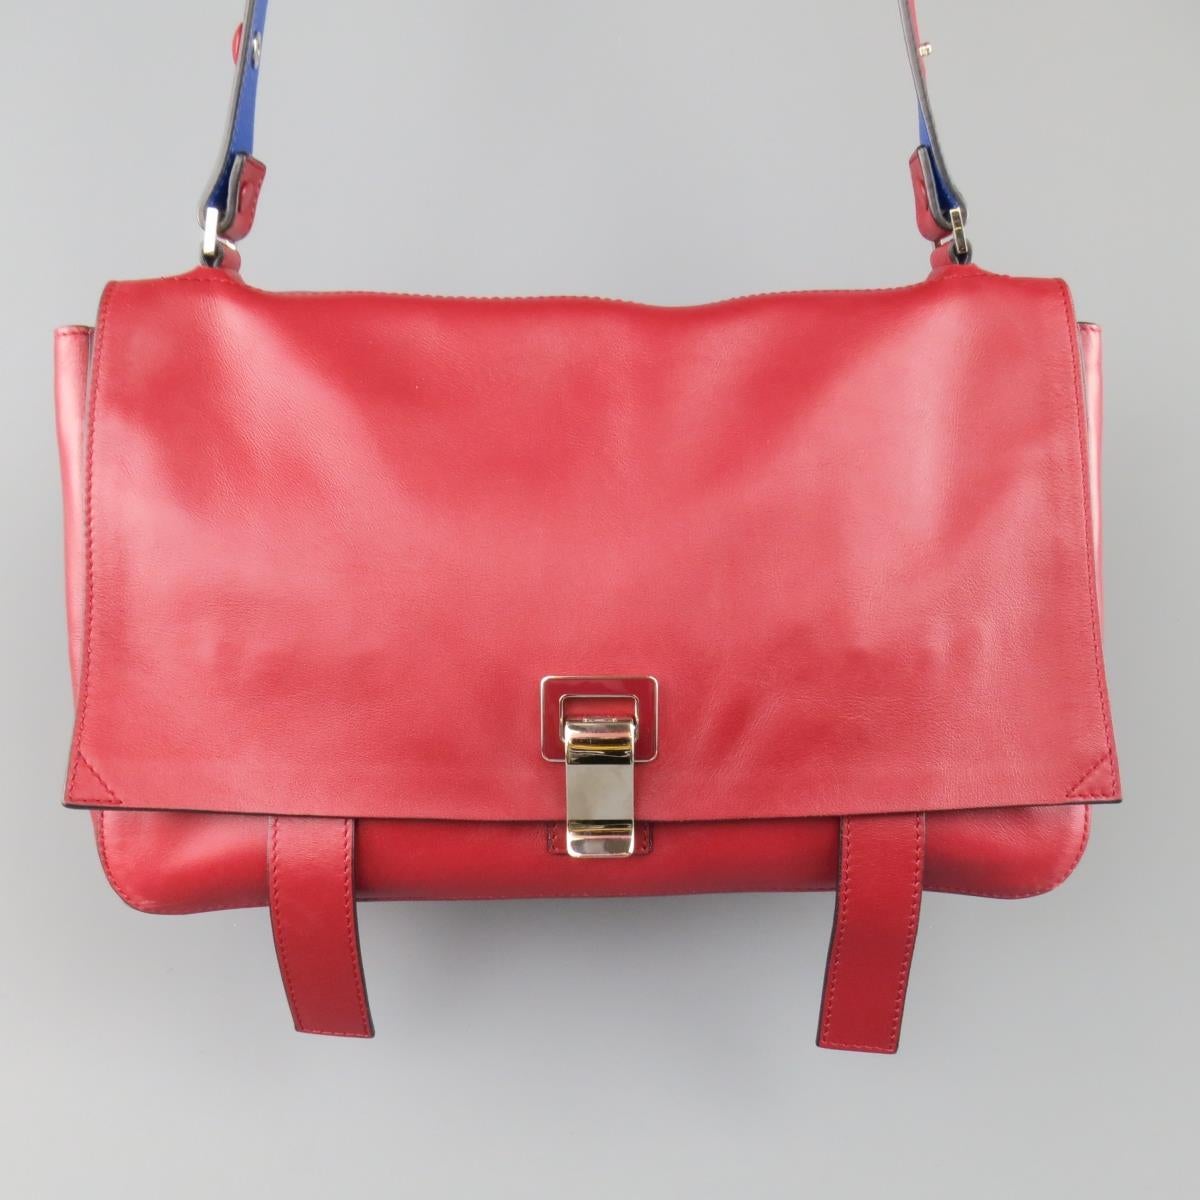 Rare PROENZA SHCOULER shoulder bag in a smooth red leather featuring a flap with enamel and silver tone metal clasp and hanging straps, adjustable shoulder strap, side snaps, and 
blue leather interior. Minor Wear. Includes Dust Bag.
Good Pre-Owned